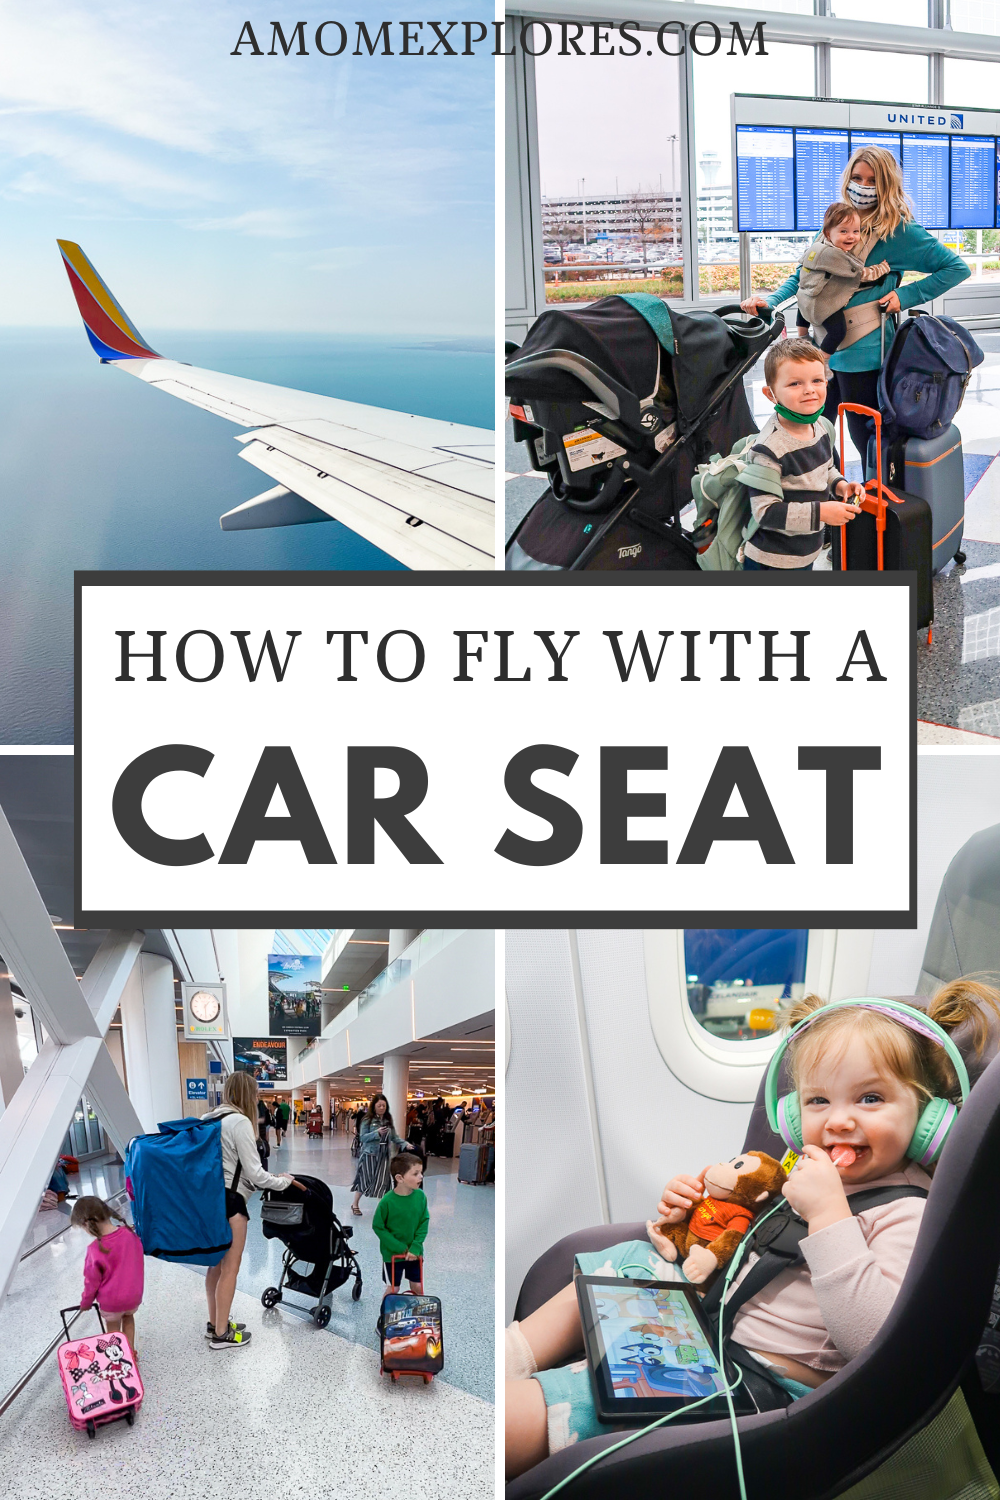 HOW TO FLY WITH A CAR SEAT.png